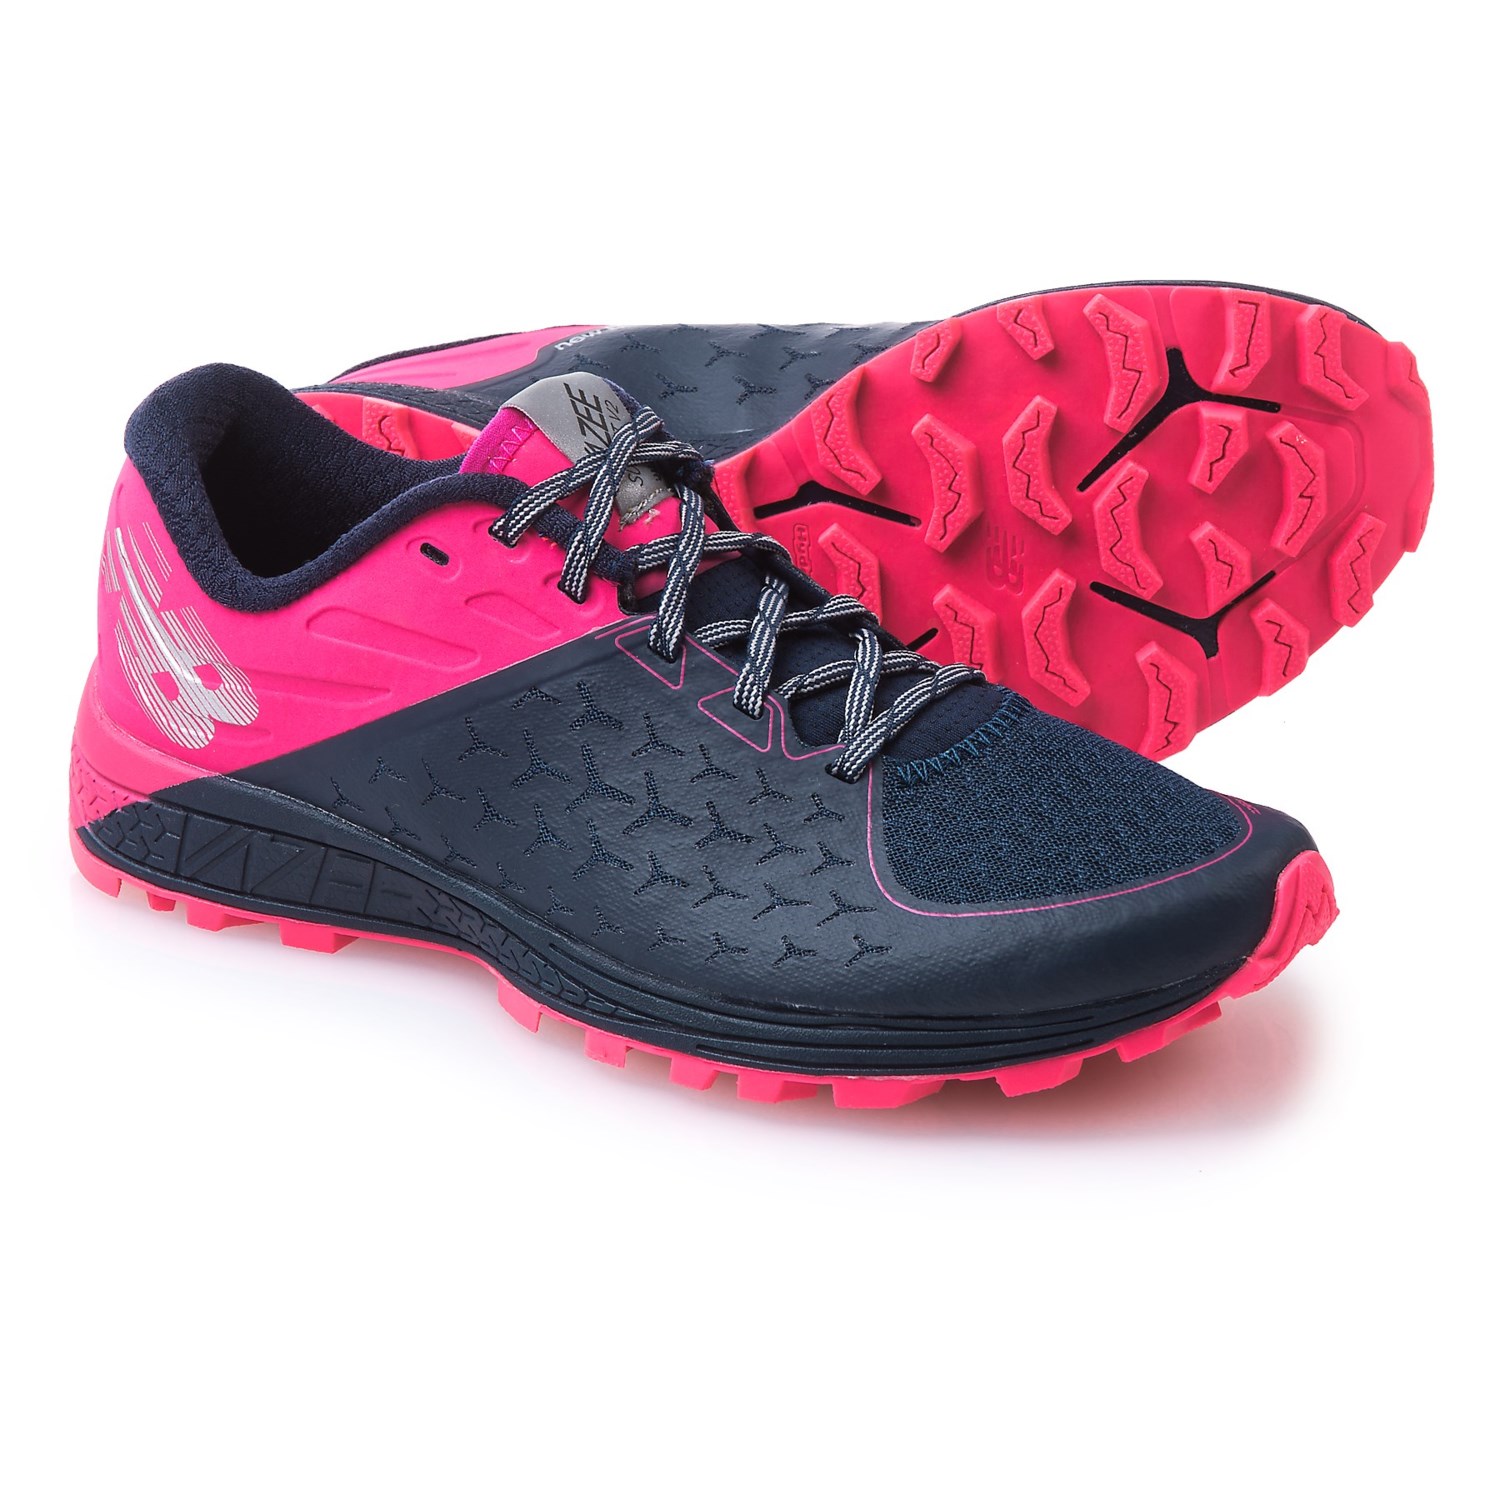 New Vazee Summit Trail Trail Running Shoes (For Women)